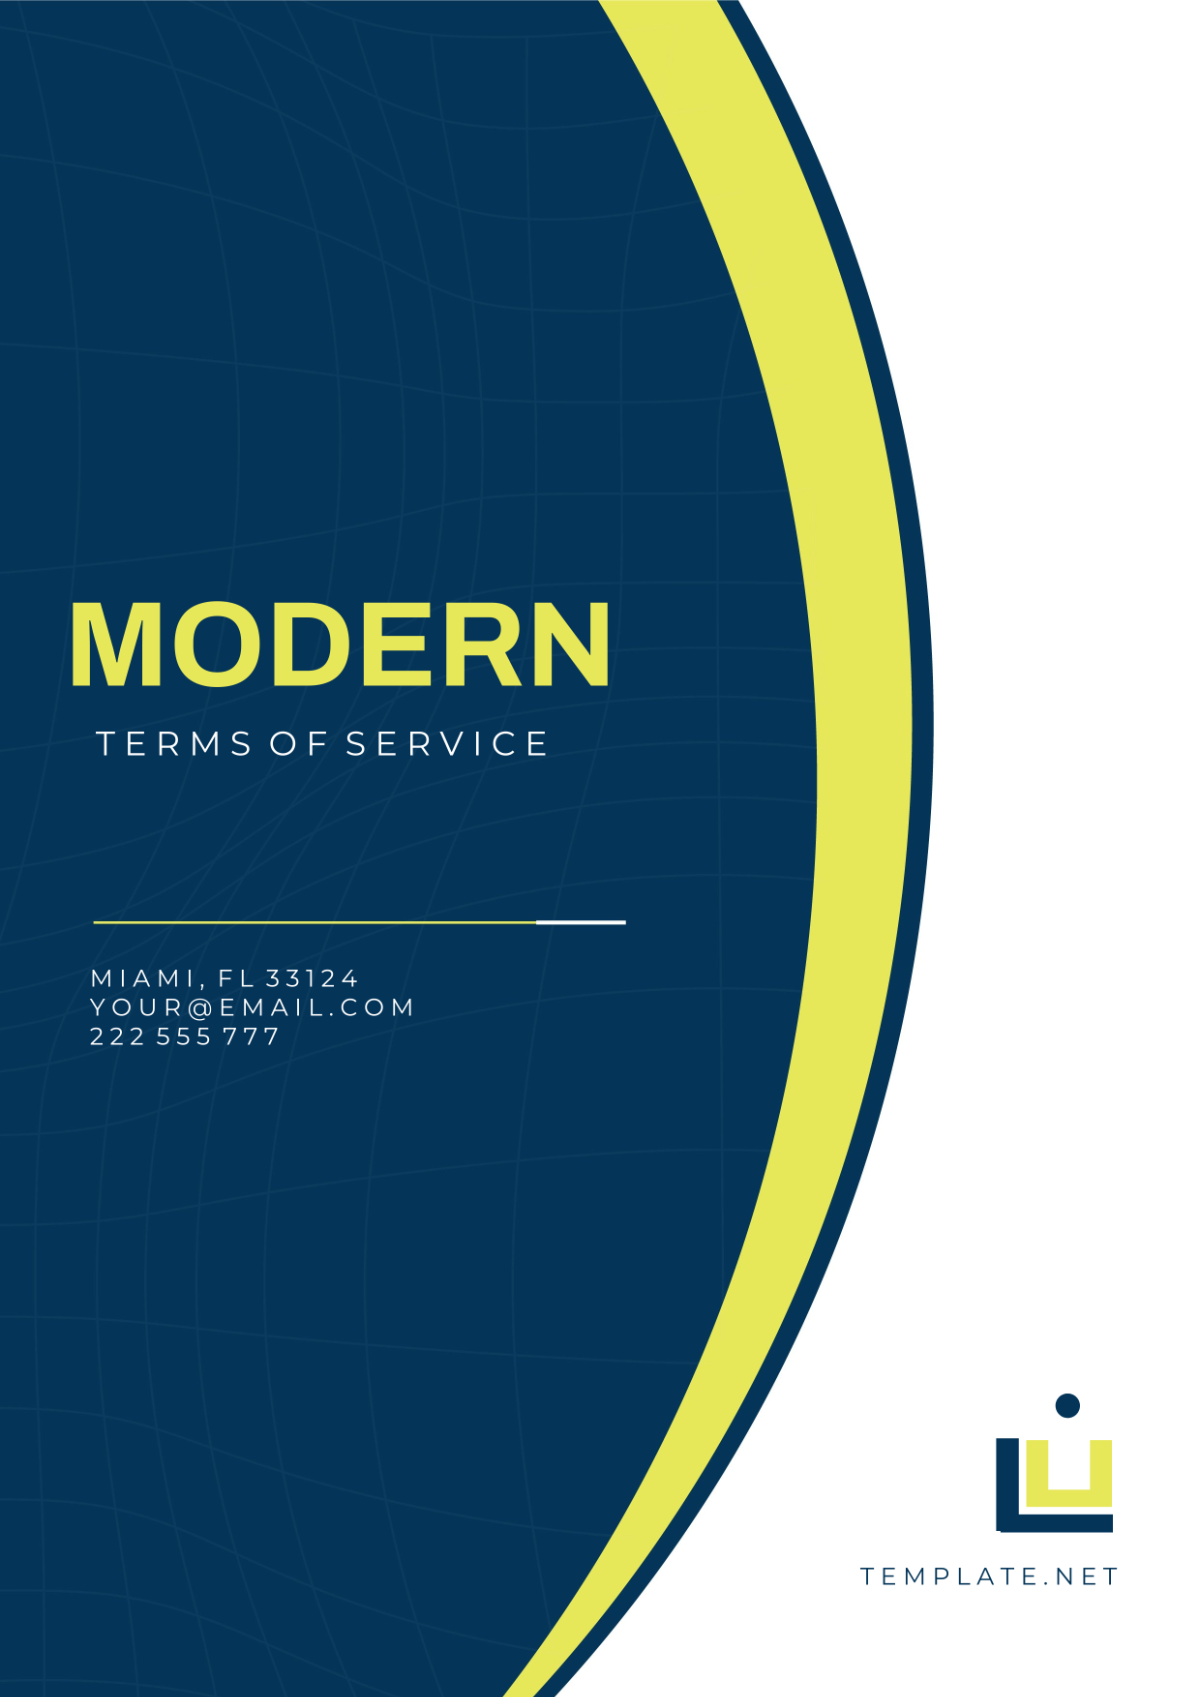 Modern Terms of Service Cover Page